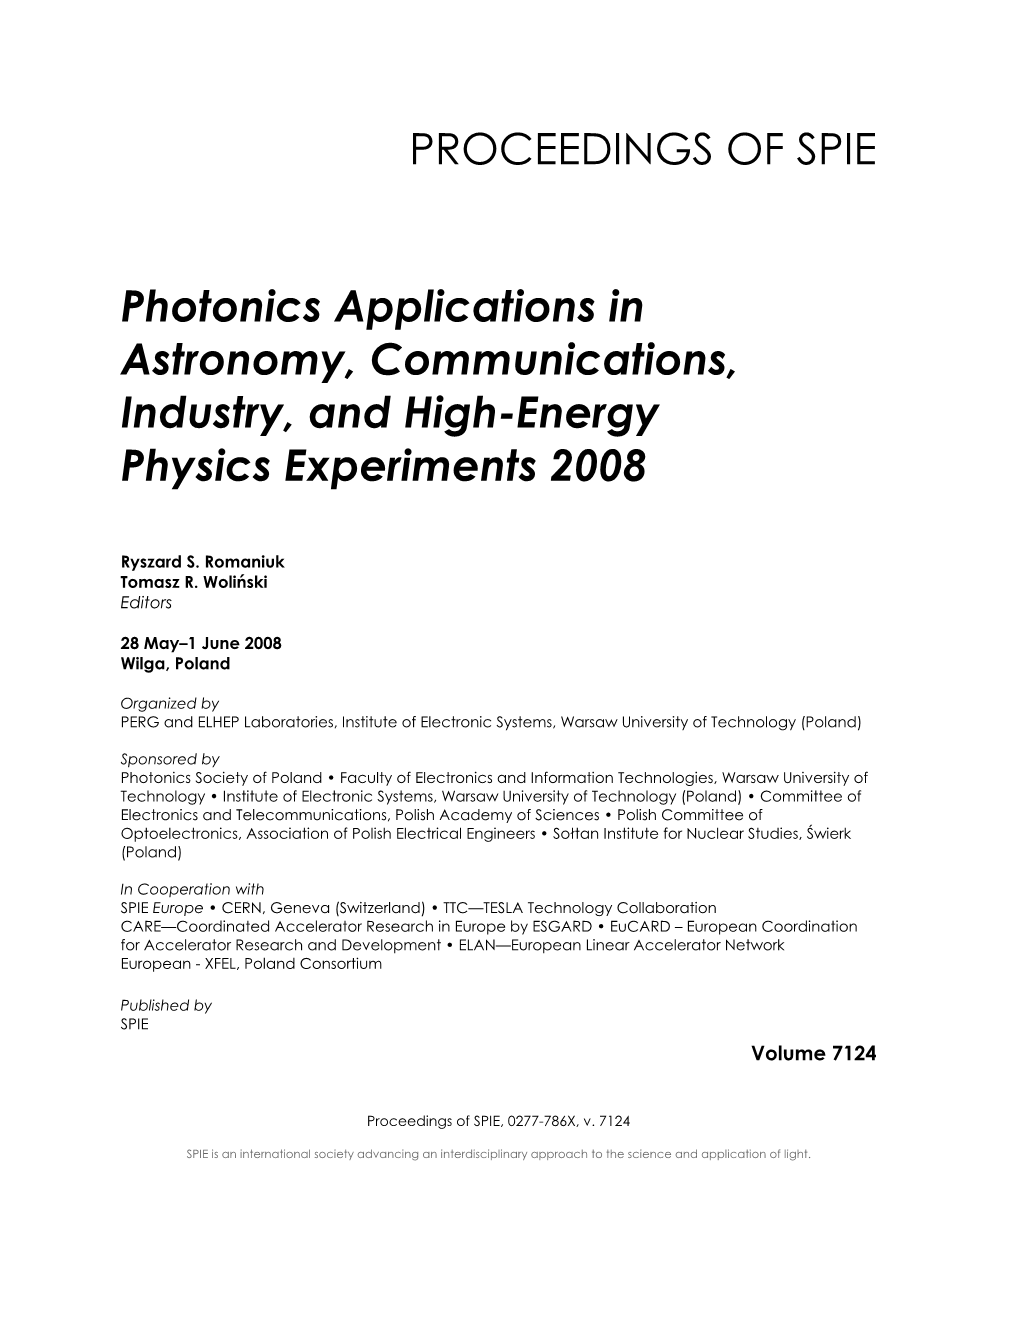 PROCEEDINGS of SPIE Photonics Applications in Astronomy